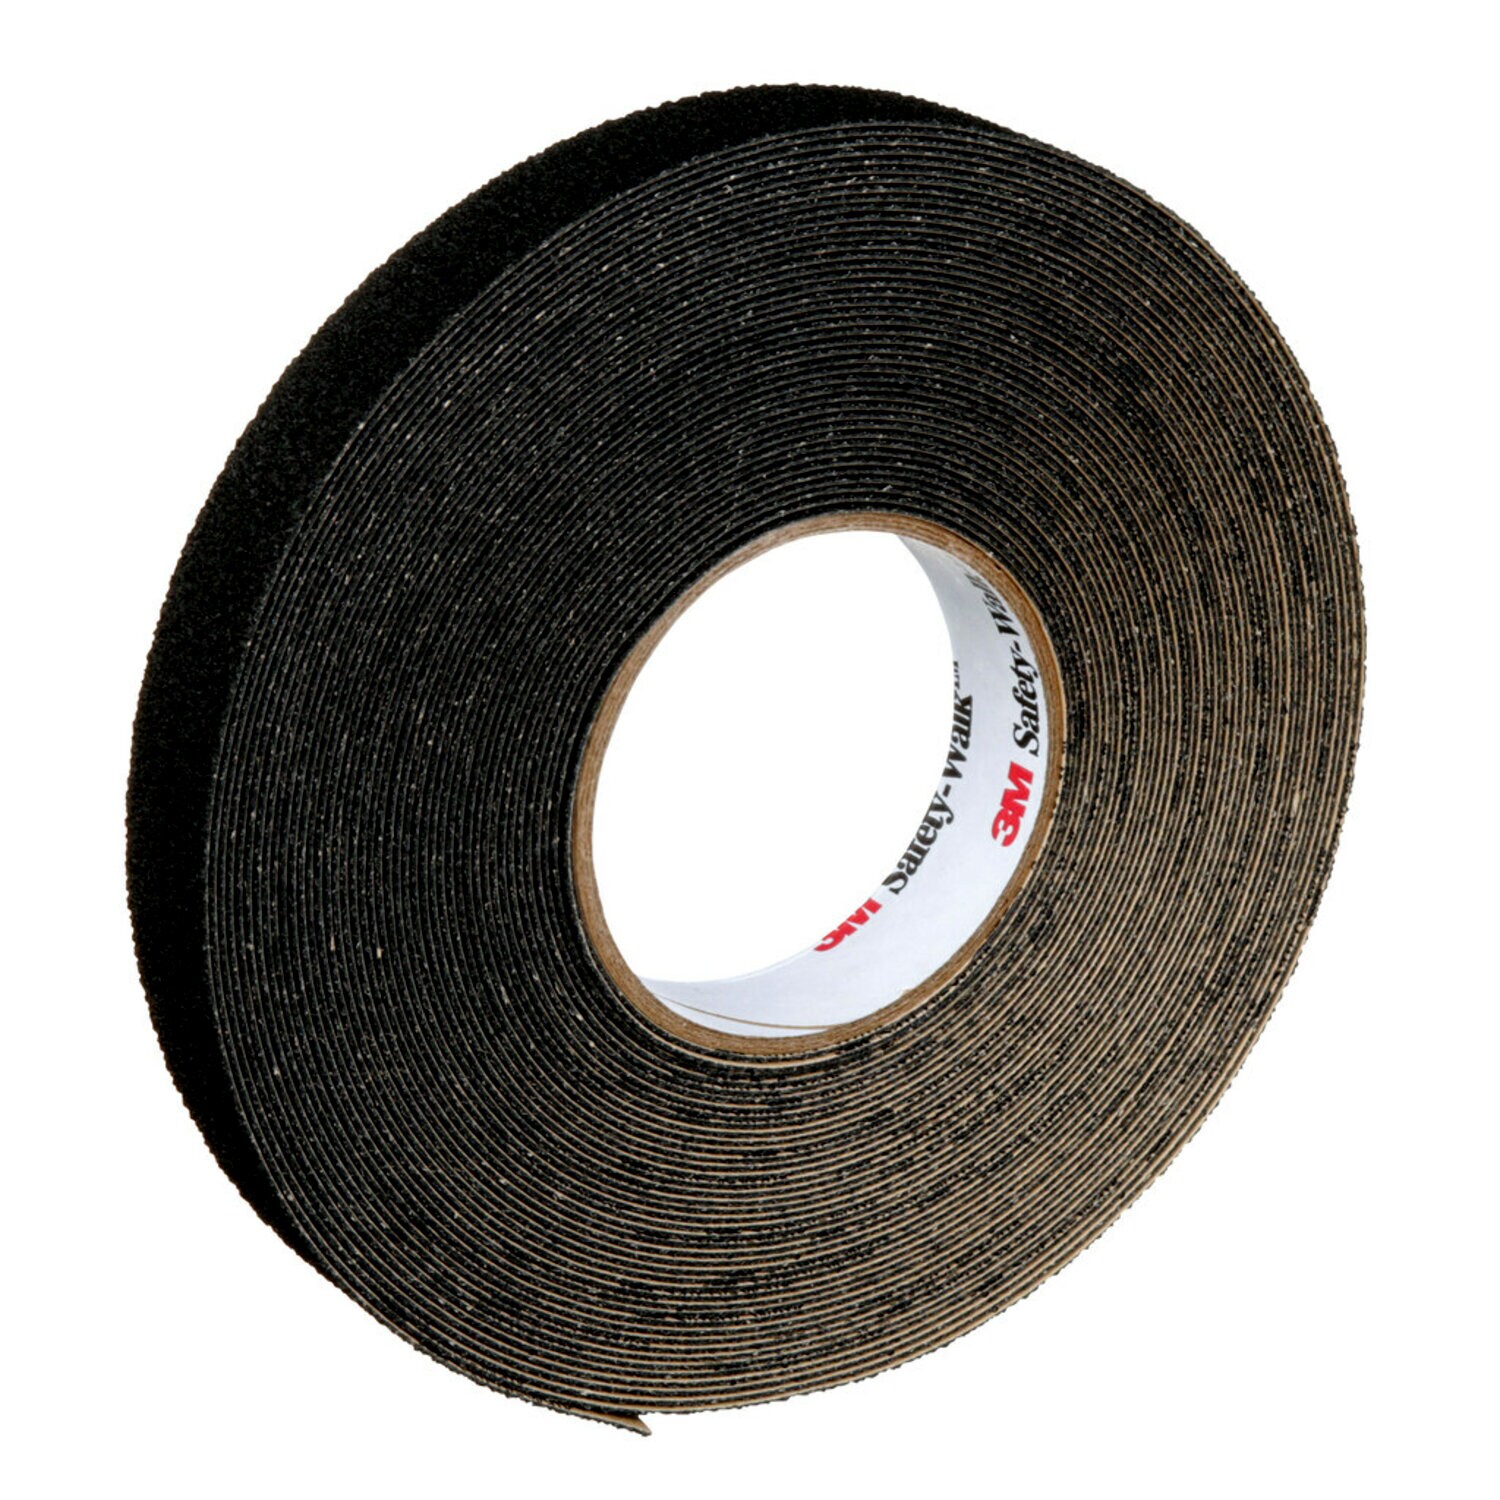 7000029629 - 3M Safety-Walk Slip-Resistant Medium Resilient Tapes & Treads 310,
Black, 1 in x 60 ft, Roll, 4/Case